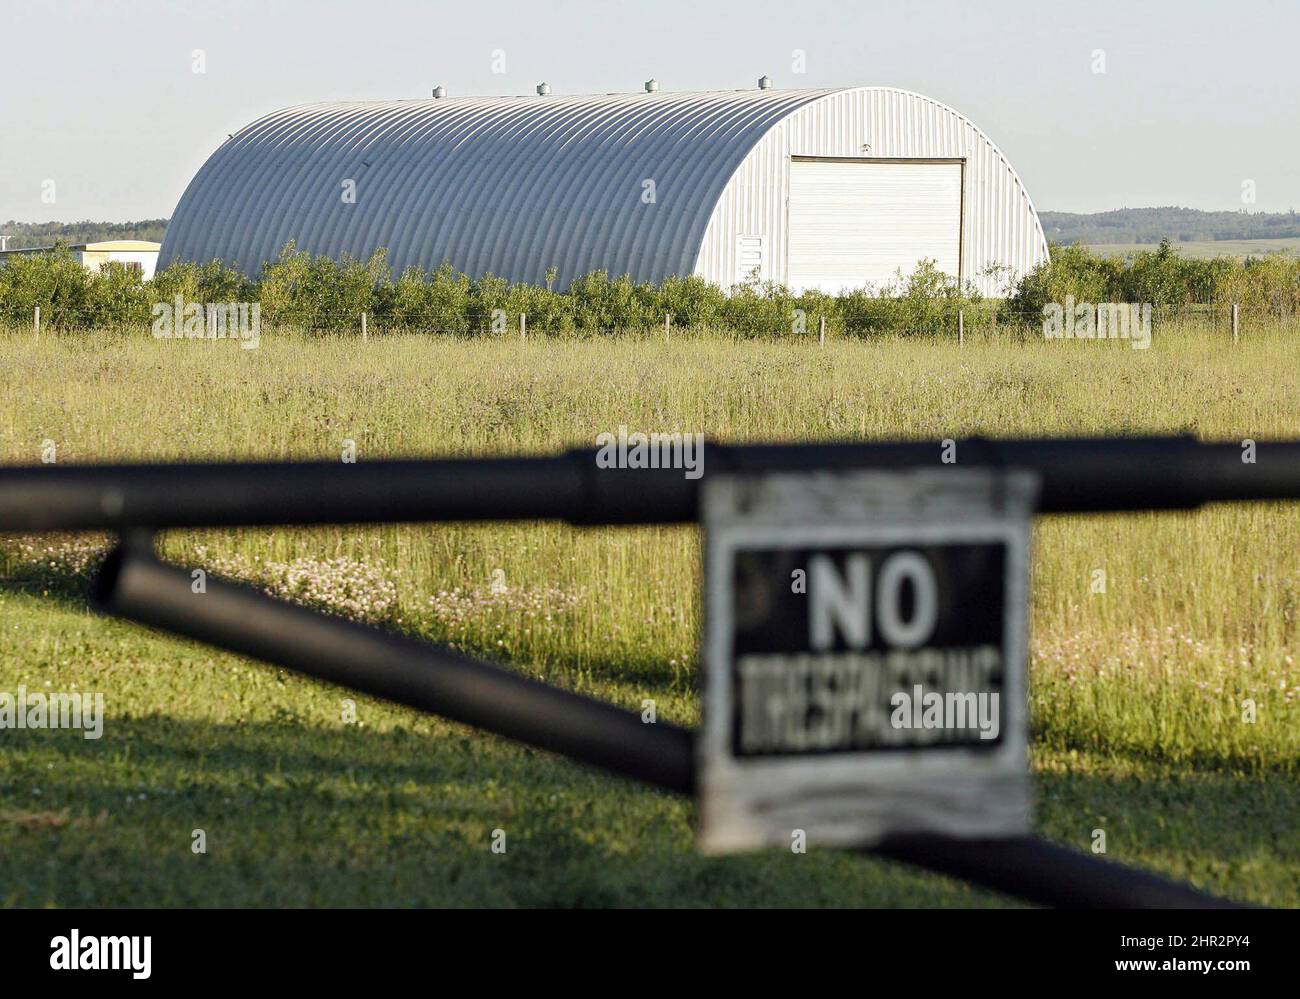 FILE - In this July 12, 2007 file photo, the Roszko farm, which was the scene of the deaths of four Royal Canadian Mounted Police officers on March 3, 2005, is seen near Mayerthorpe, Alberta, Canada. (AP Photo/The Canadian Press, Jeff McIntosh, File) Stock Photo